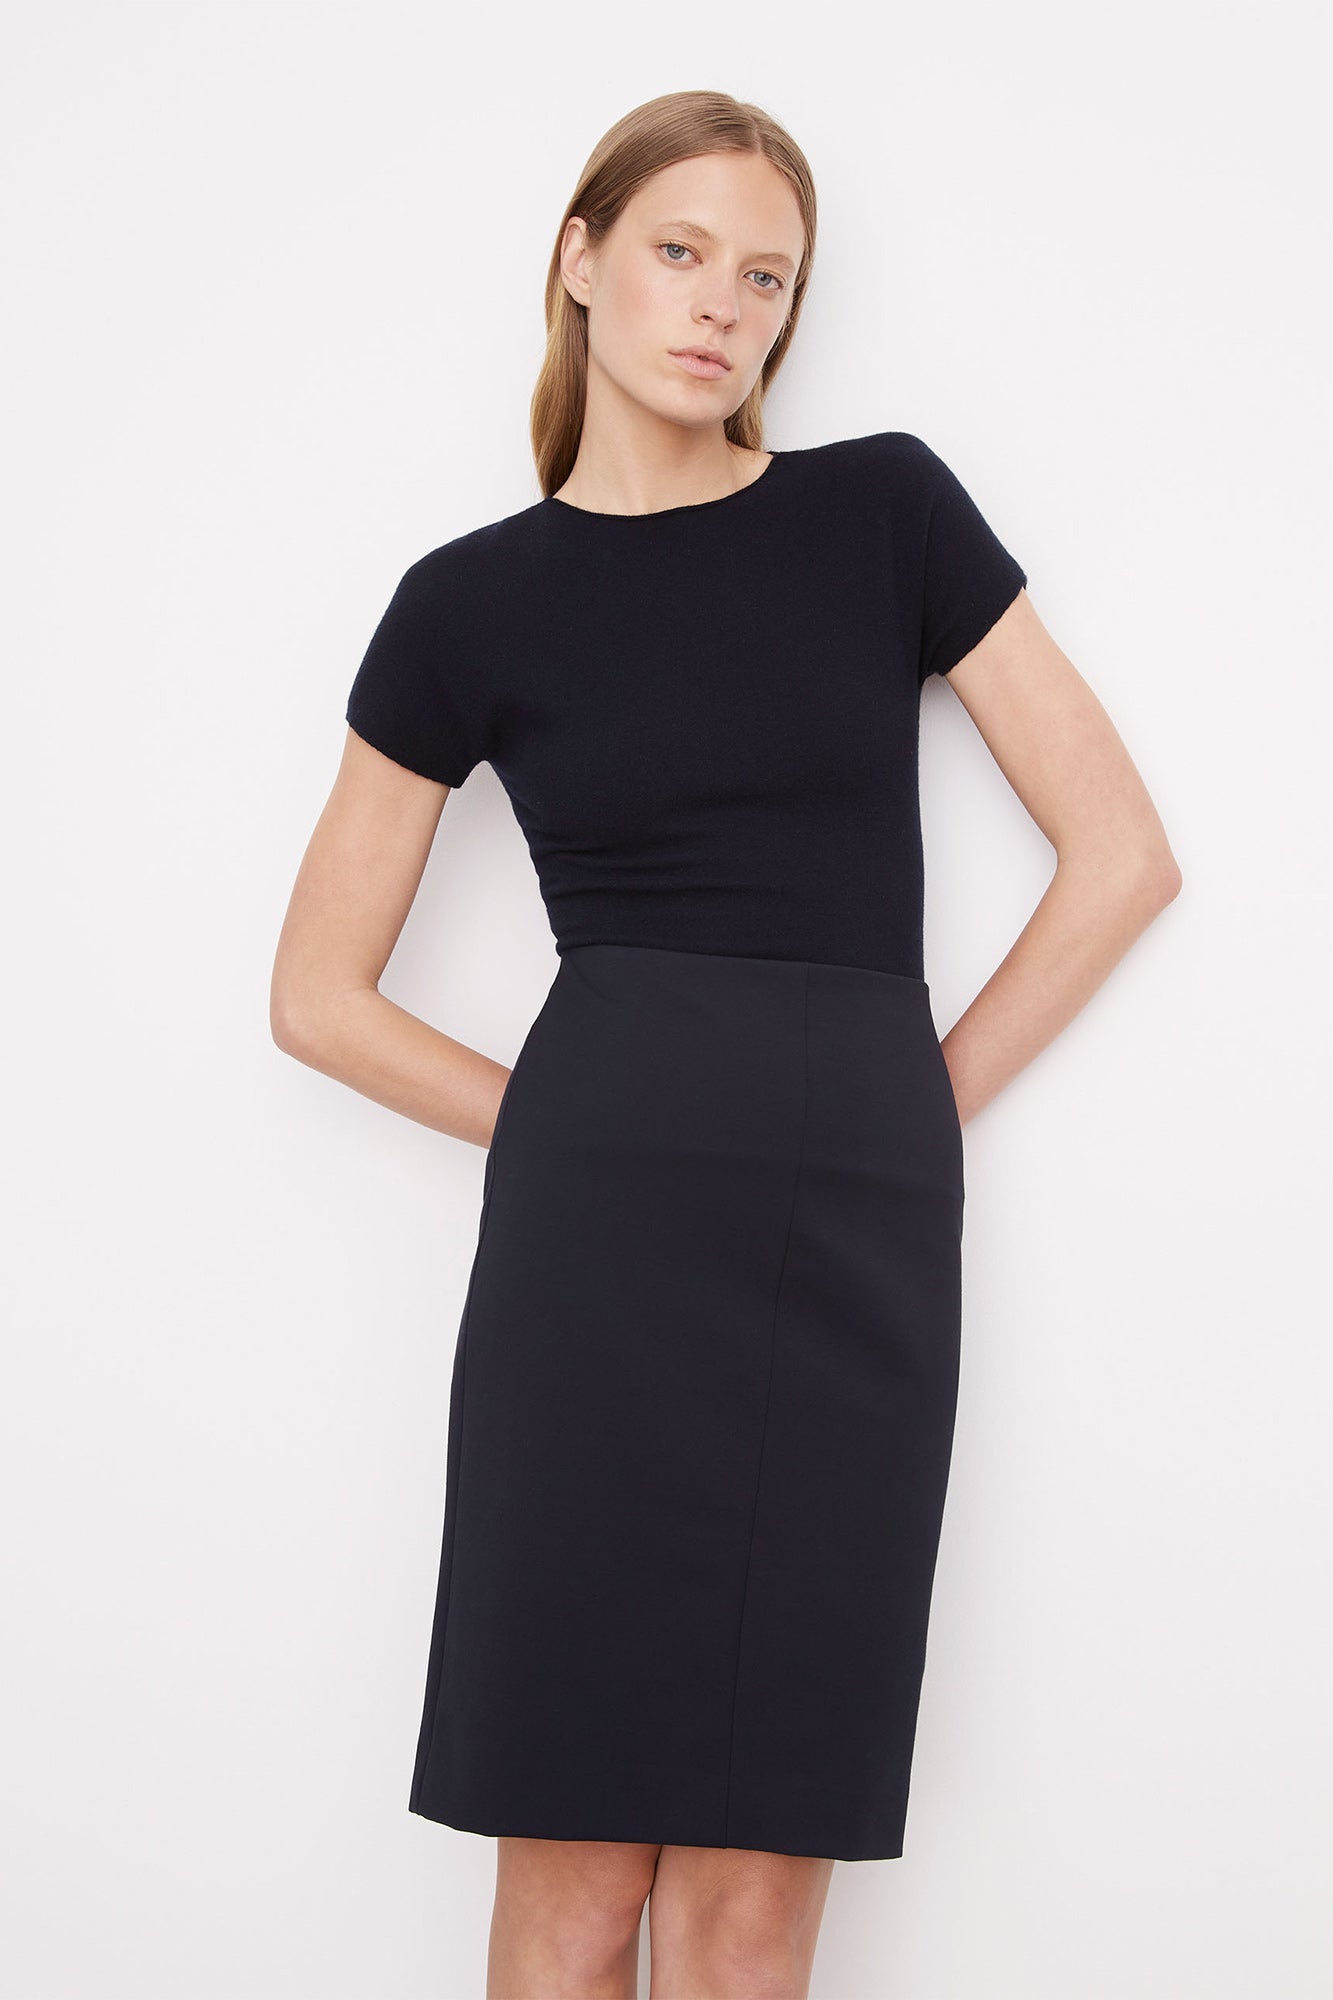 This classic Seam Front Pencil Skirt by Vince is the ideal choice for business attire